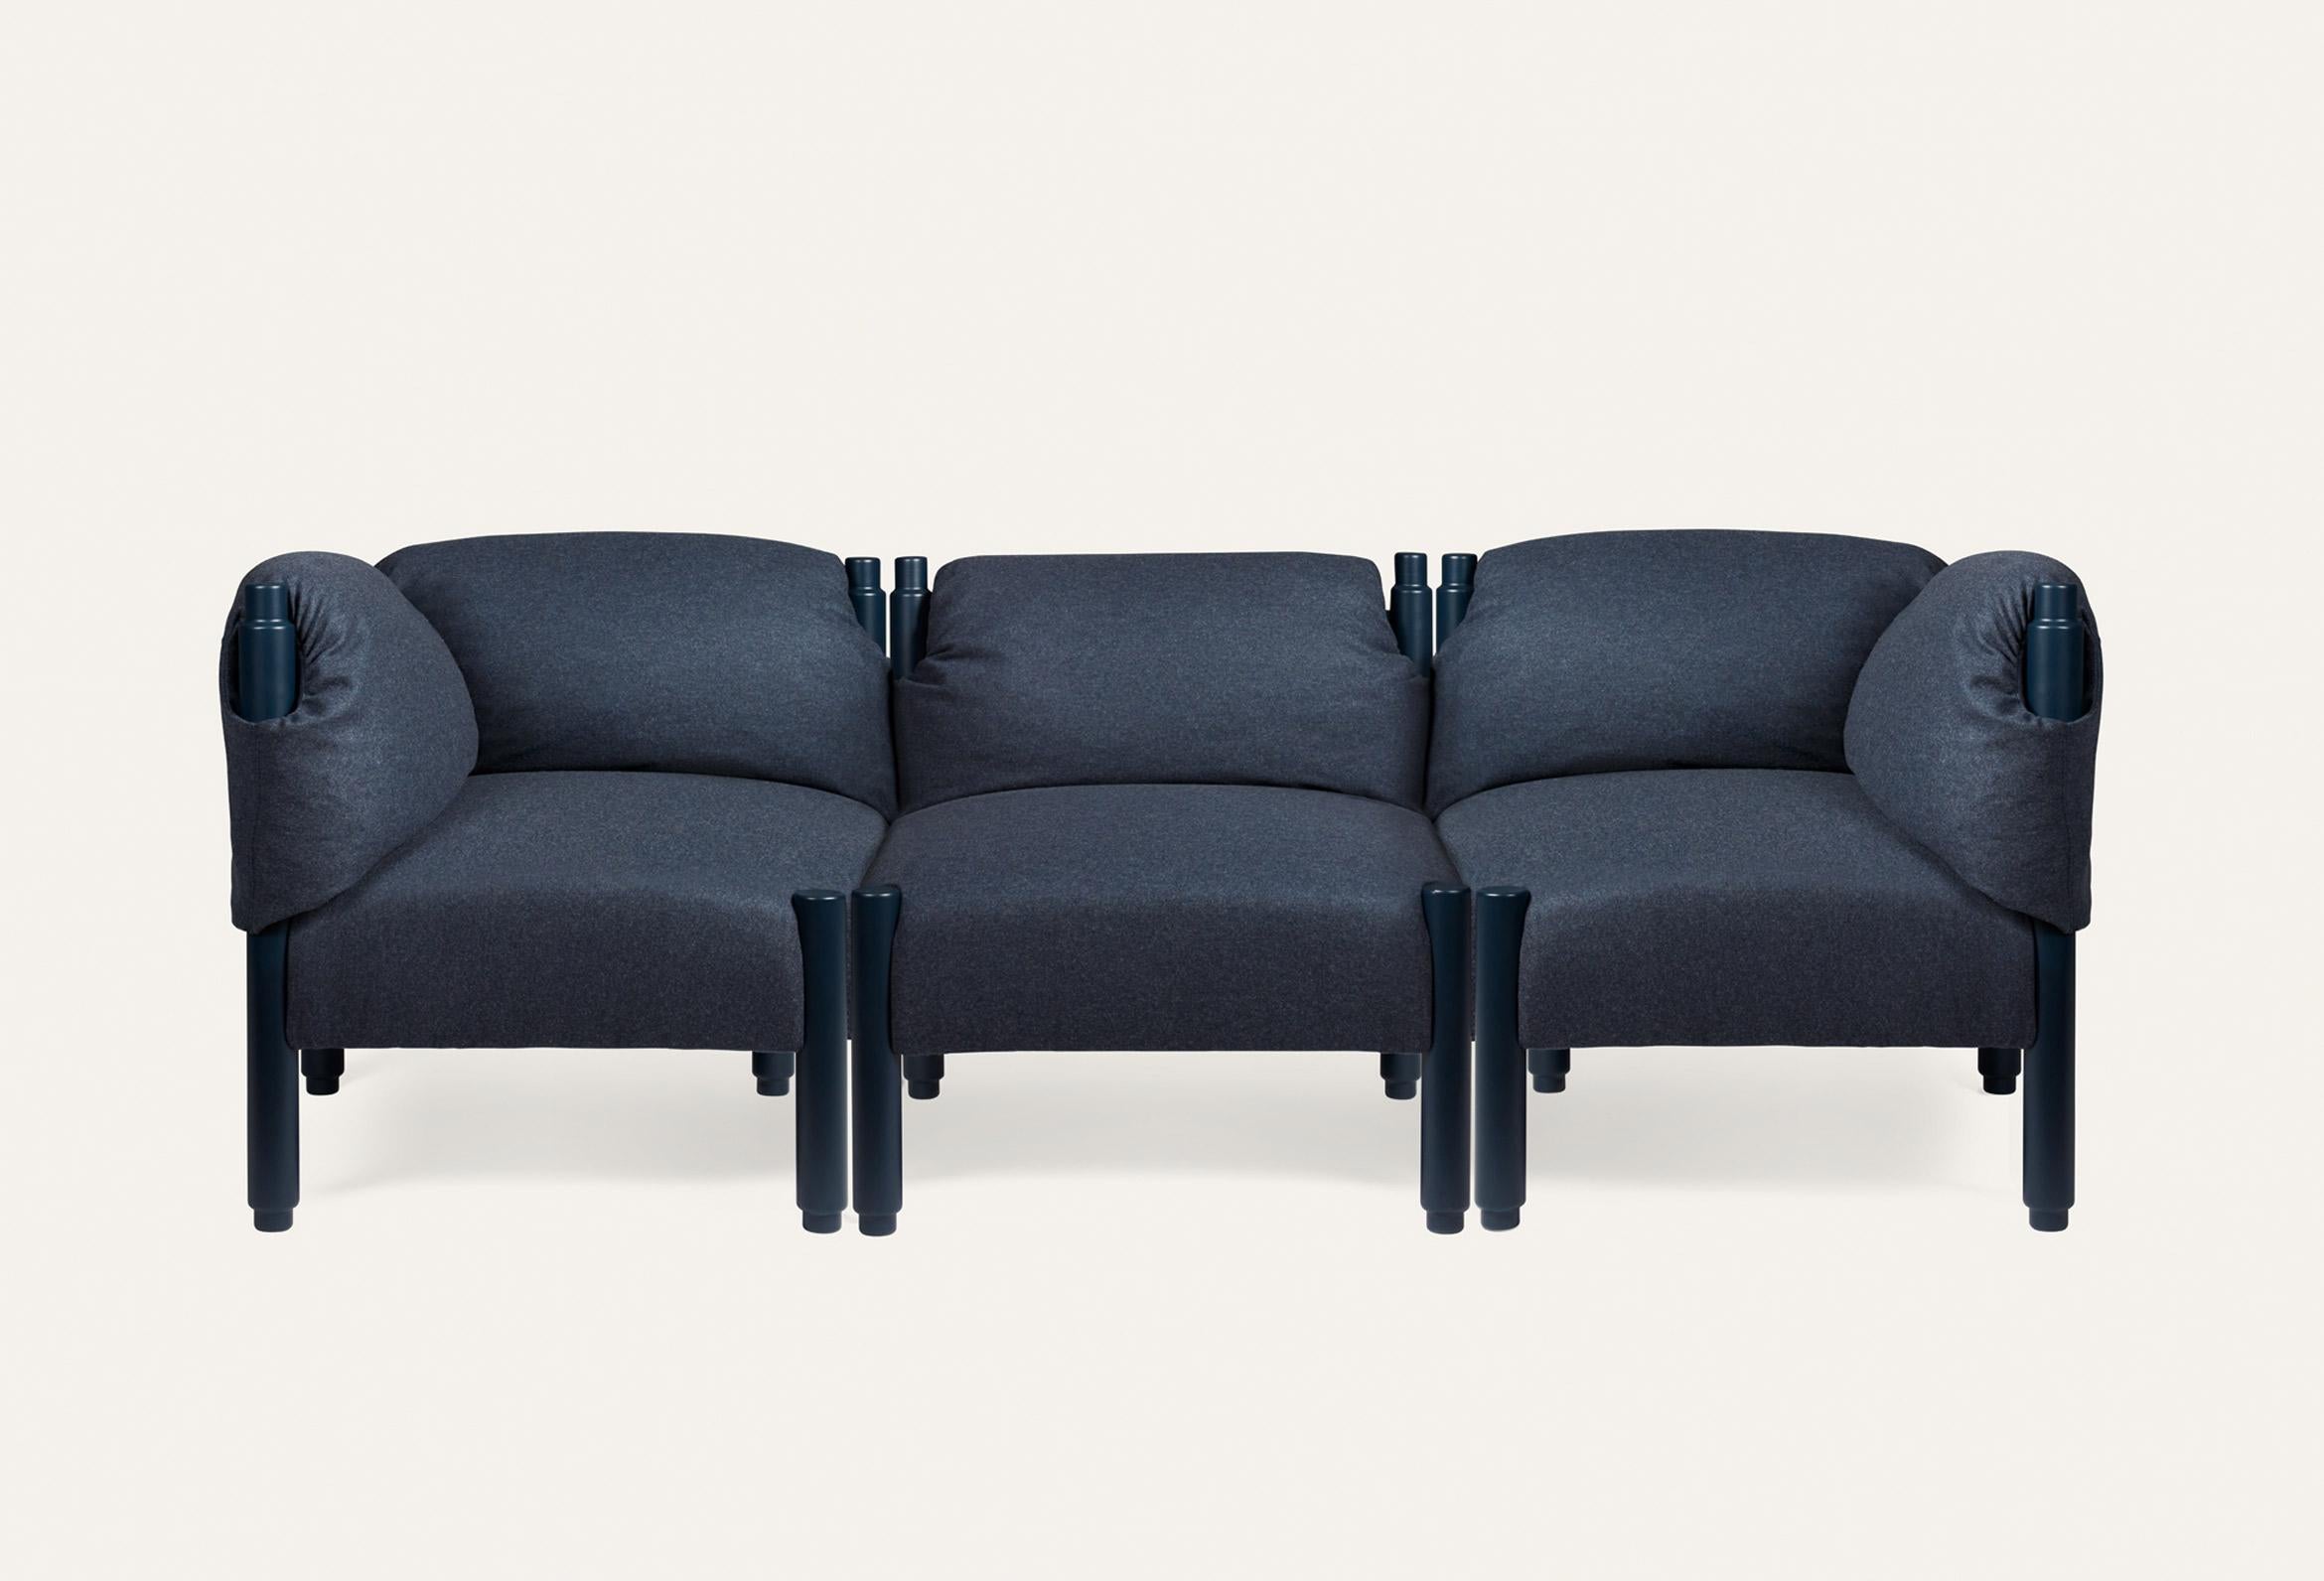 Blue stand by Me sofa by Storängen Design
Dimensions: D 222 x W 74 x H 73 x SH 42 cm
Materials: birch wood, fabric.
Available in other colors and fabrics. With fixed back or pillows.
Available in different module convinations: corner section,